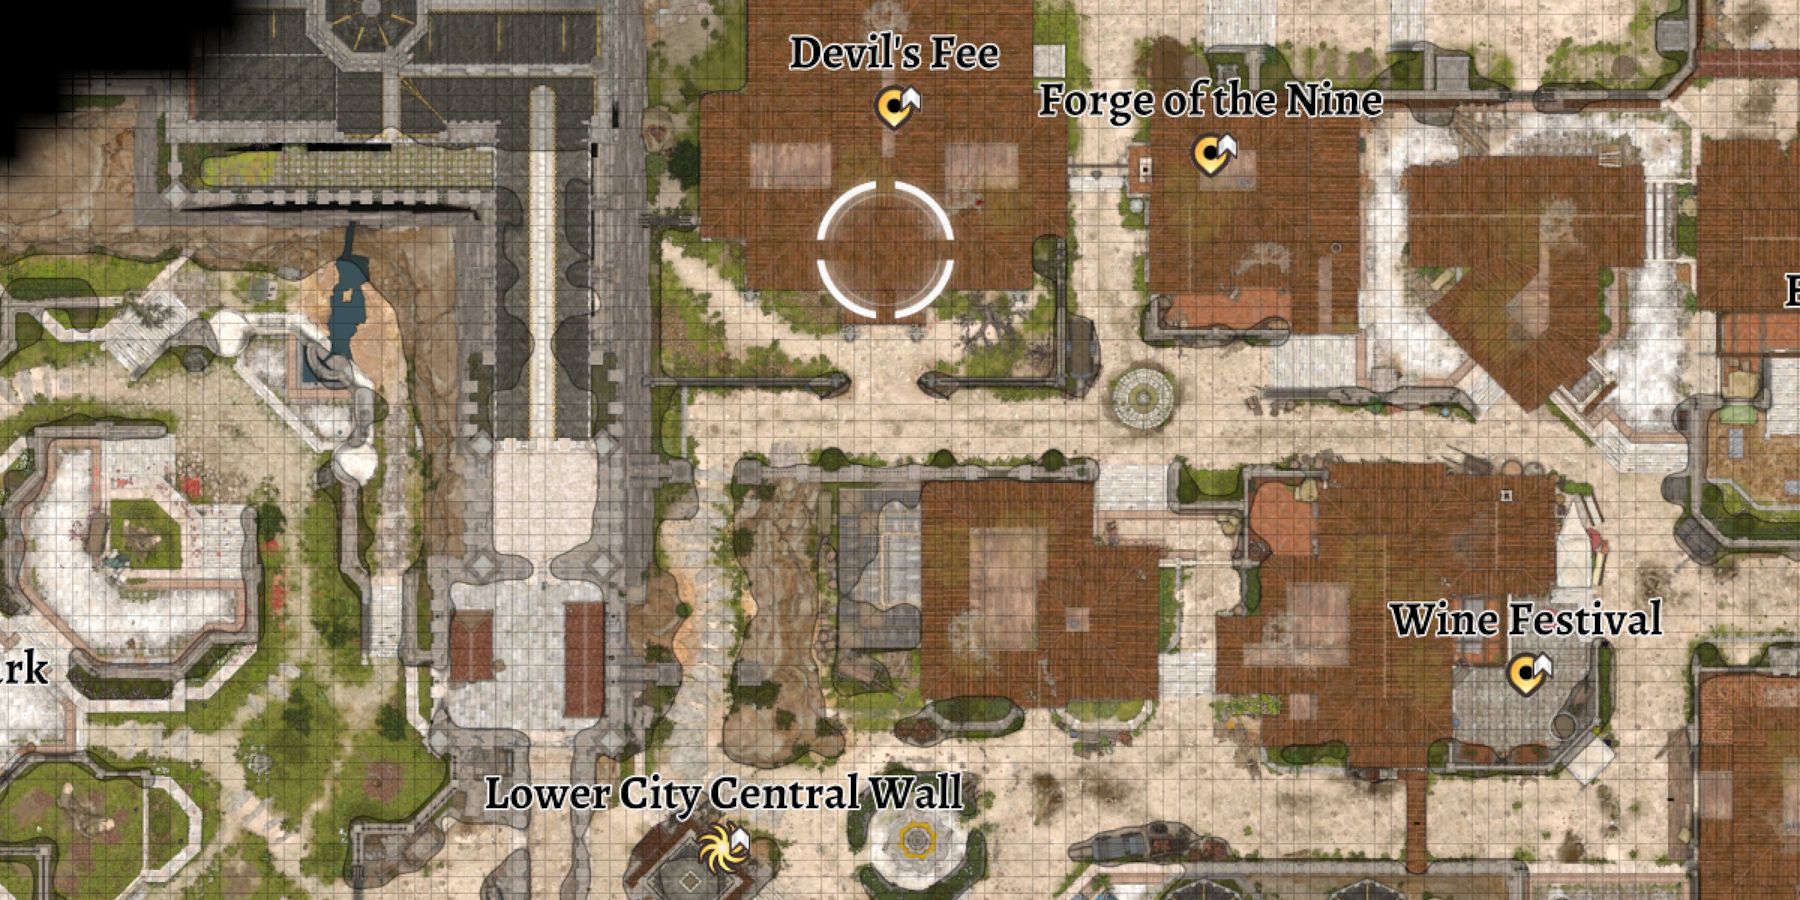 A map displays the location of Devil's Fee